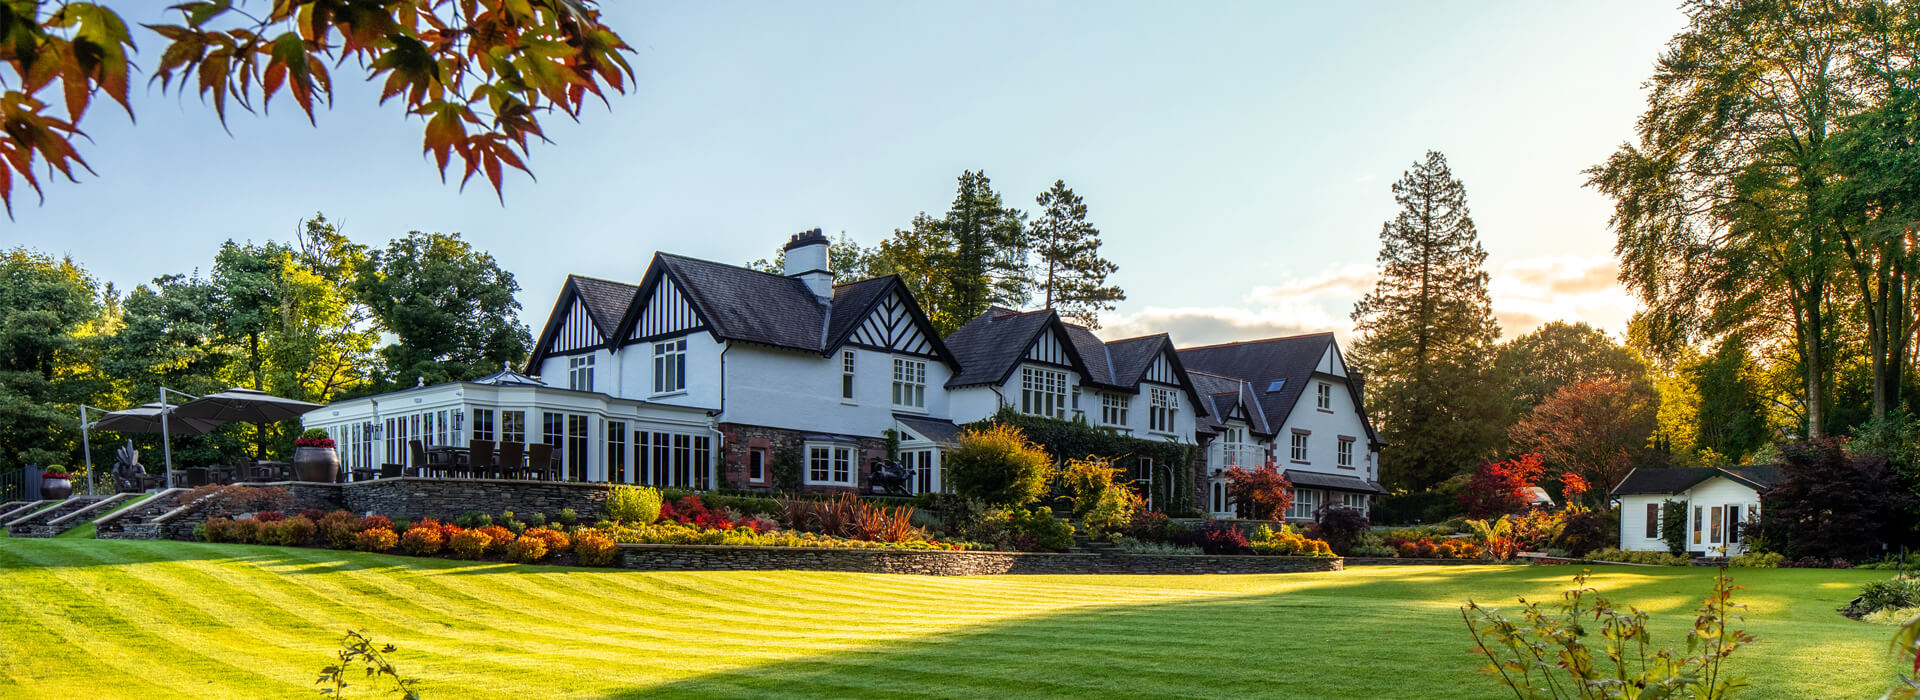 Leeu Collection | United Kingdom | OFFERS & EXPERIENCES Golfing In The Lakes